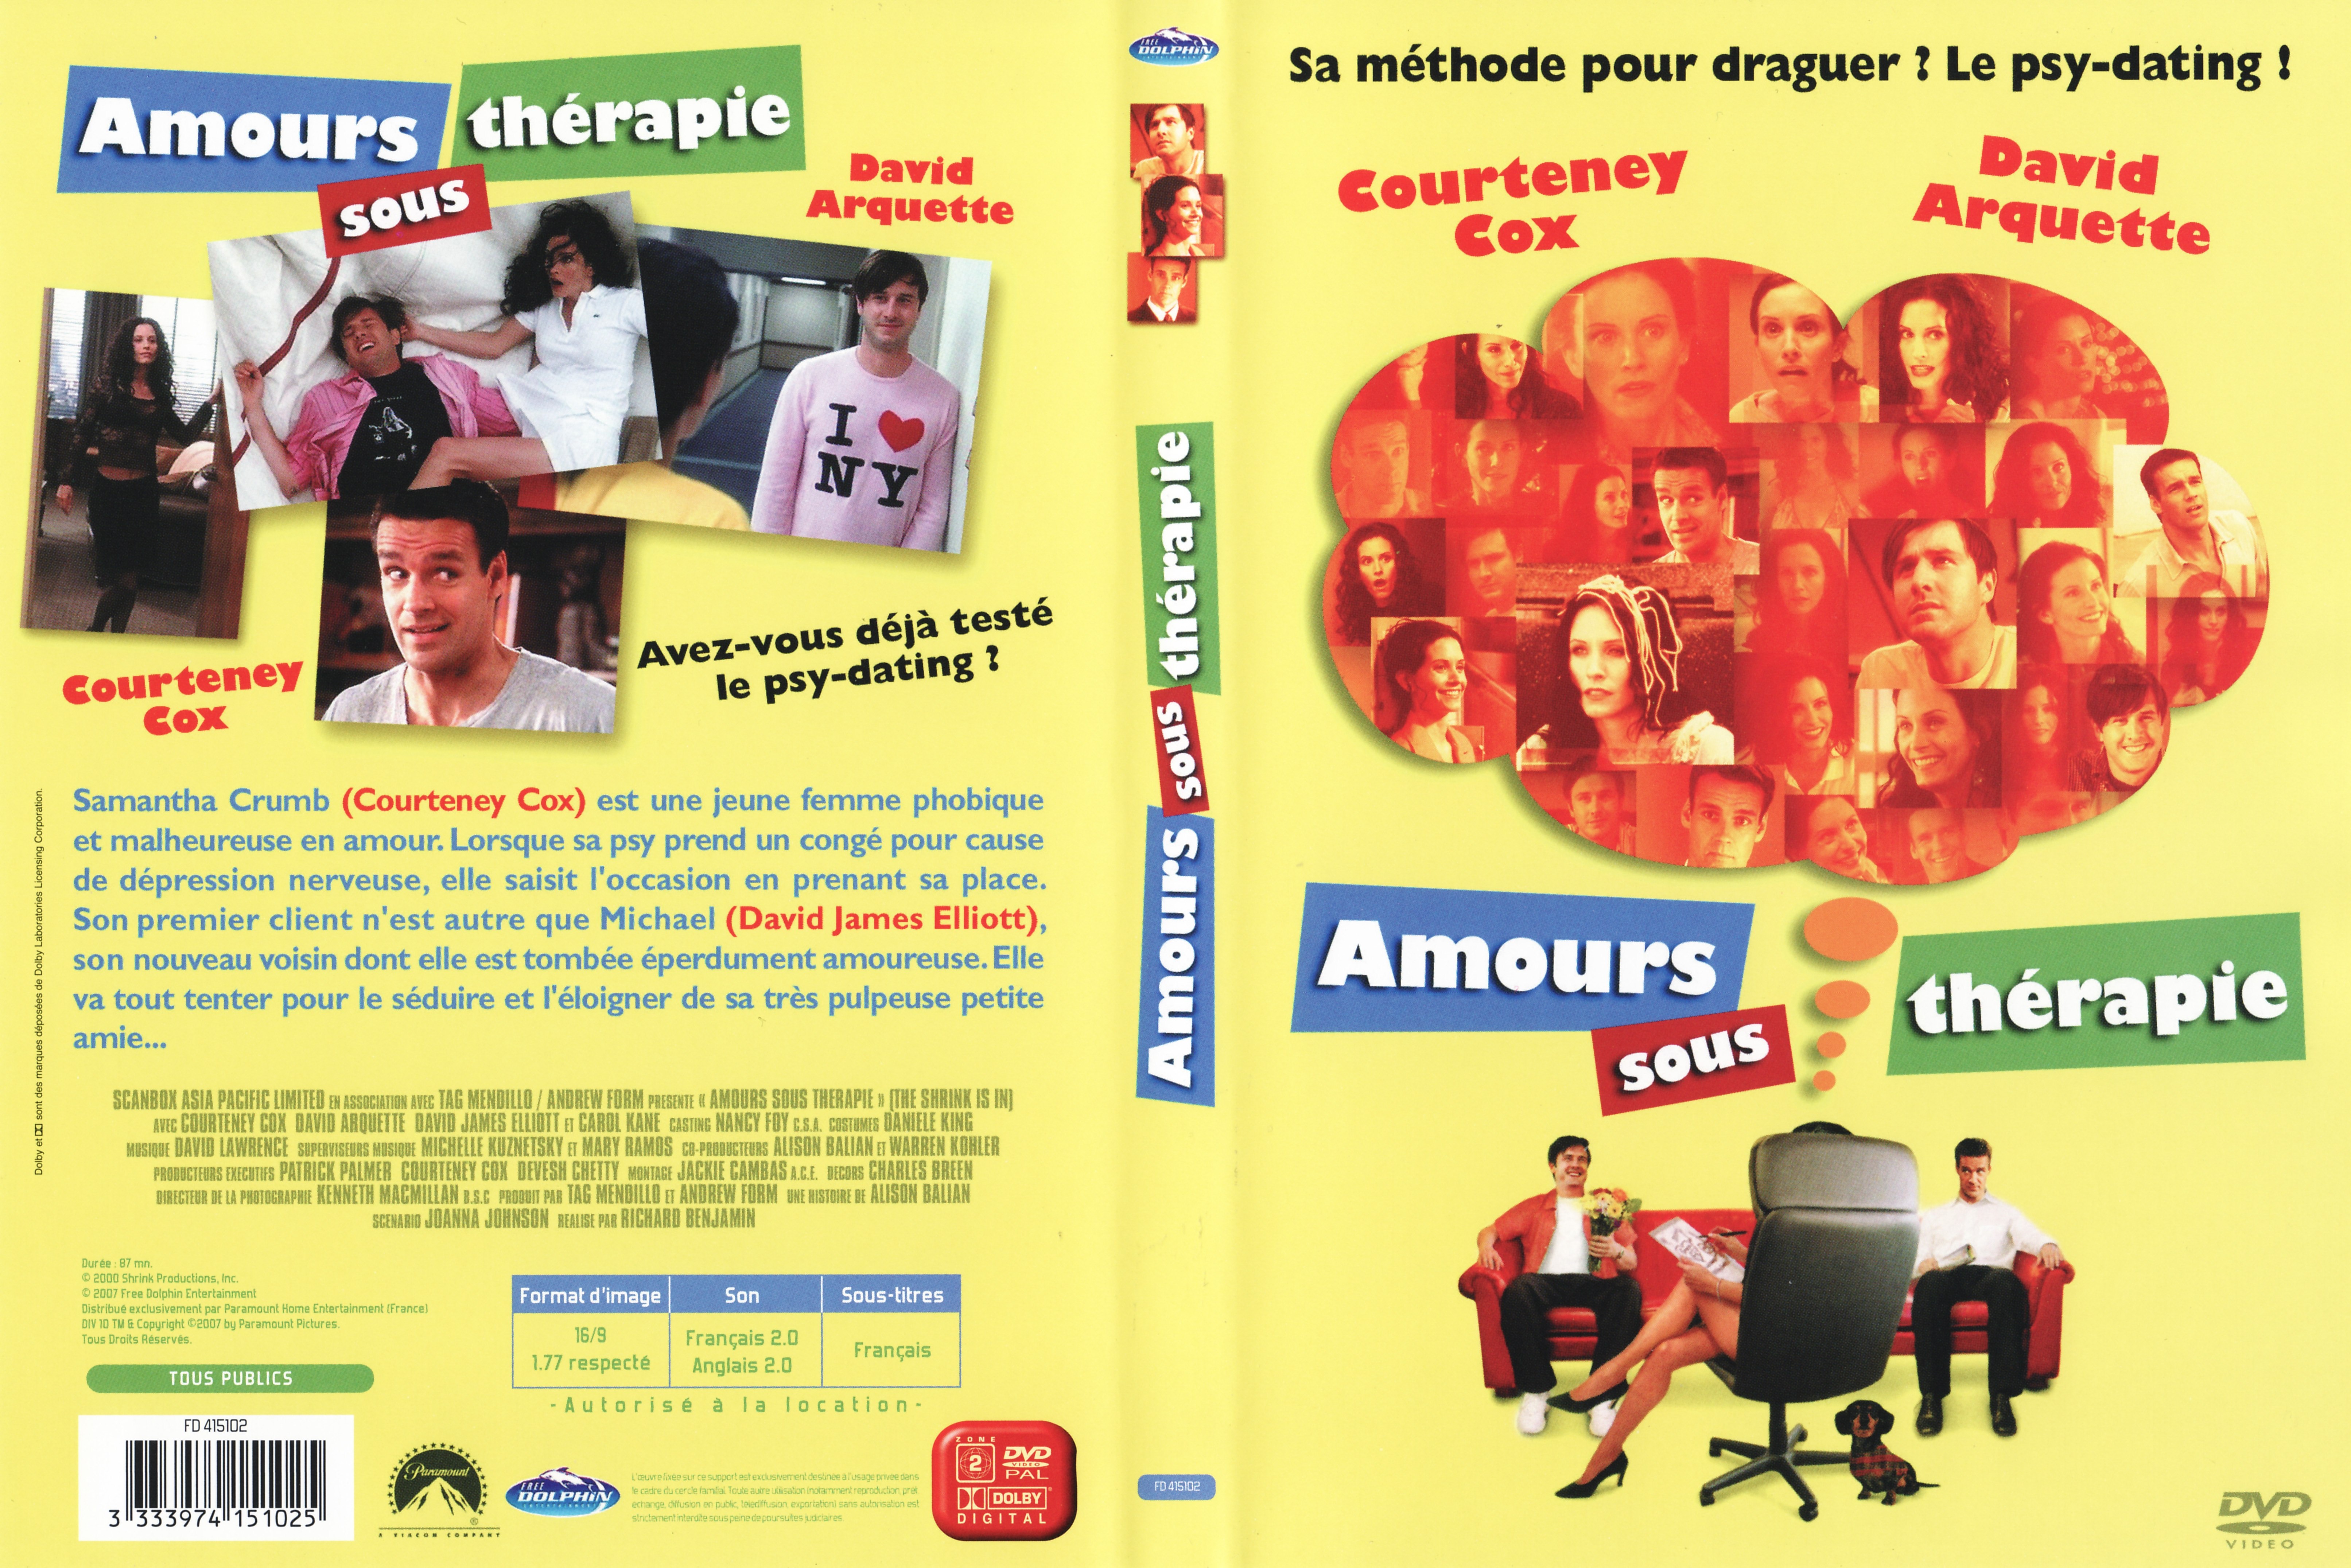 Jaquette DVD Amours sous therapie